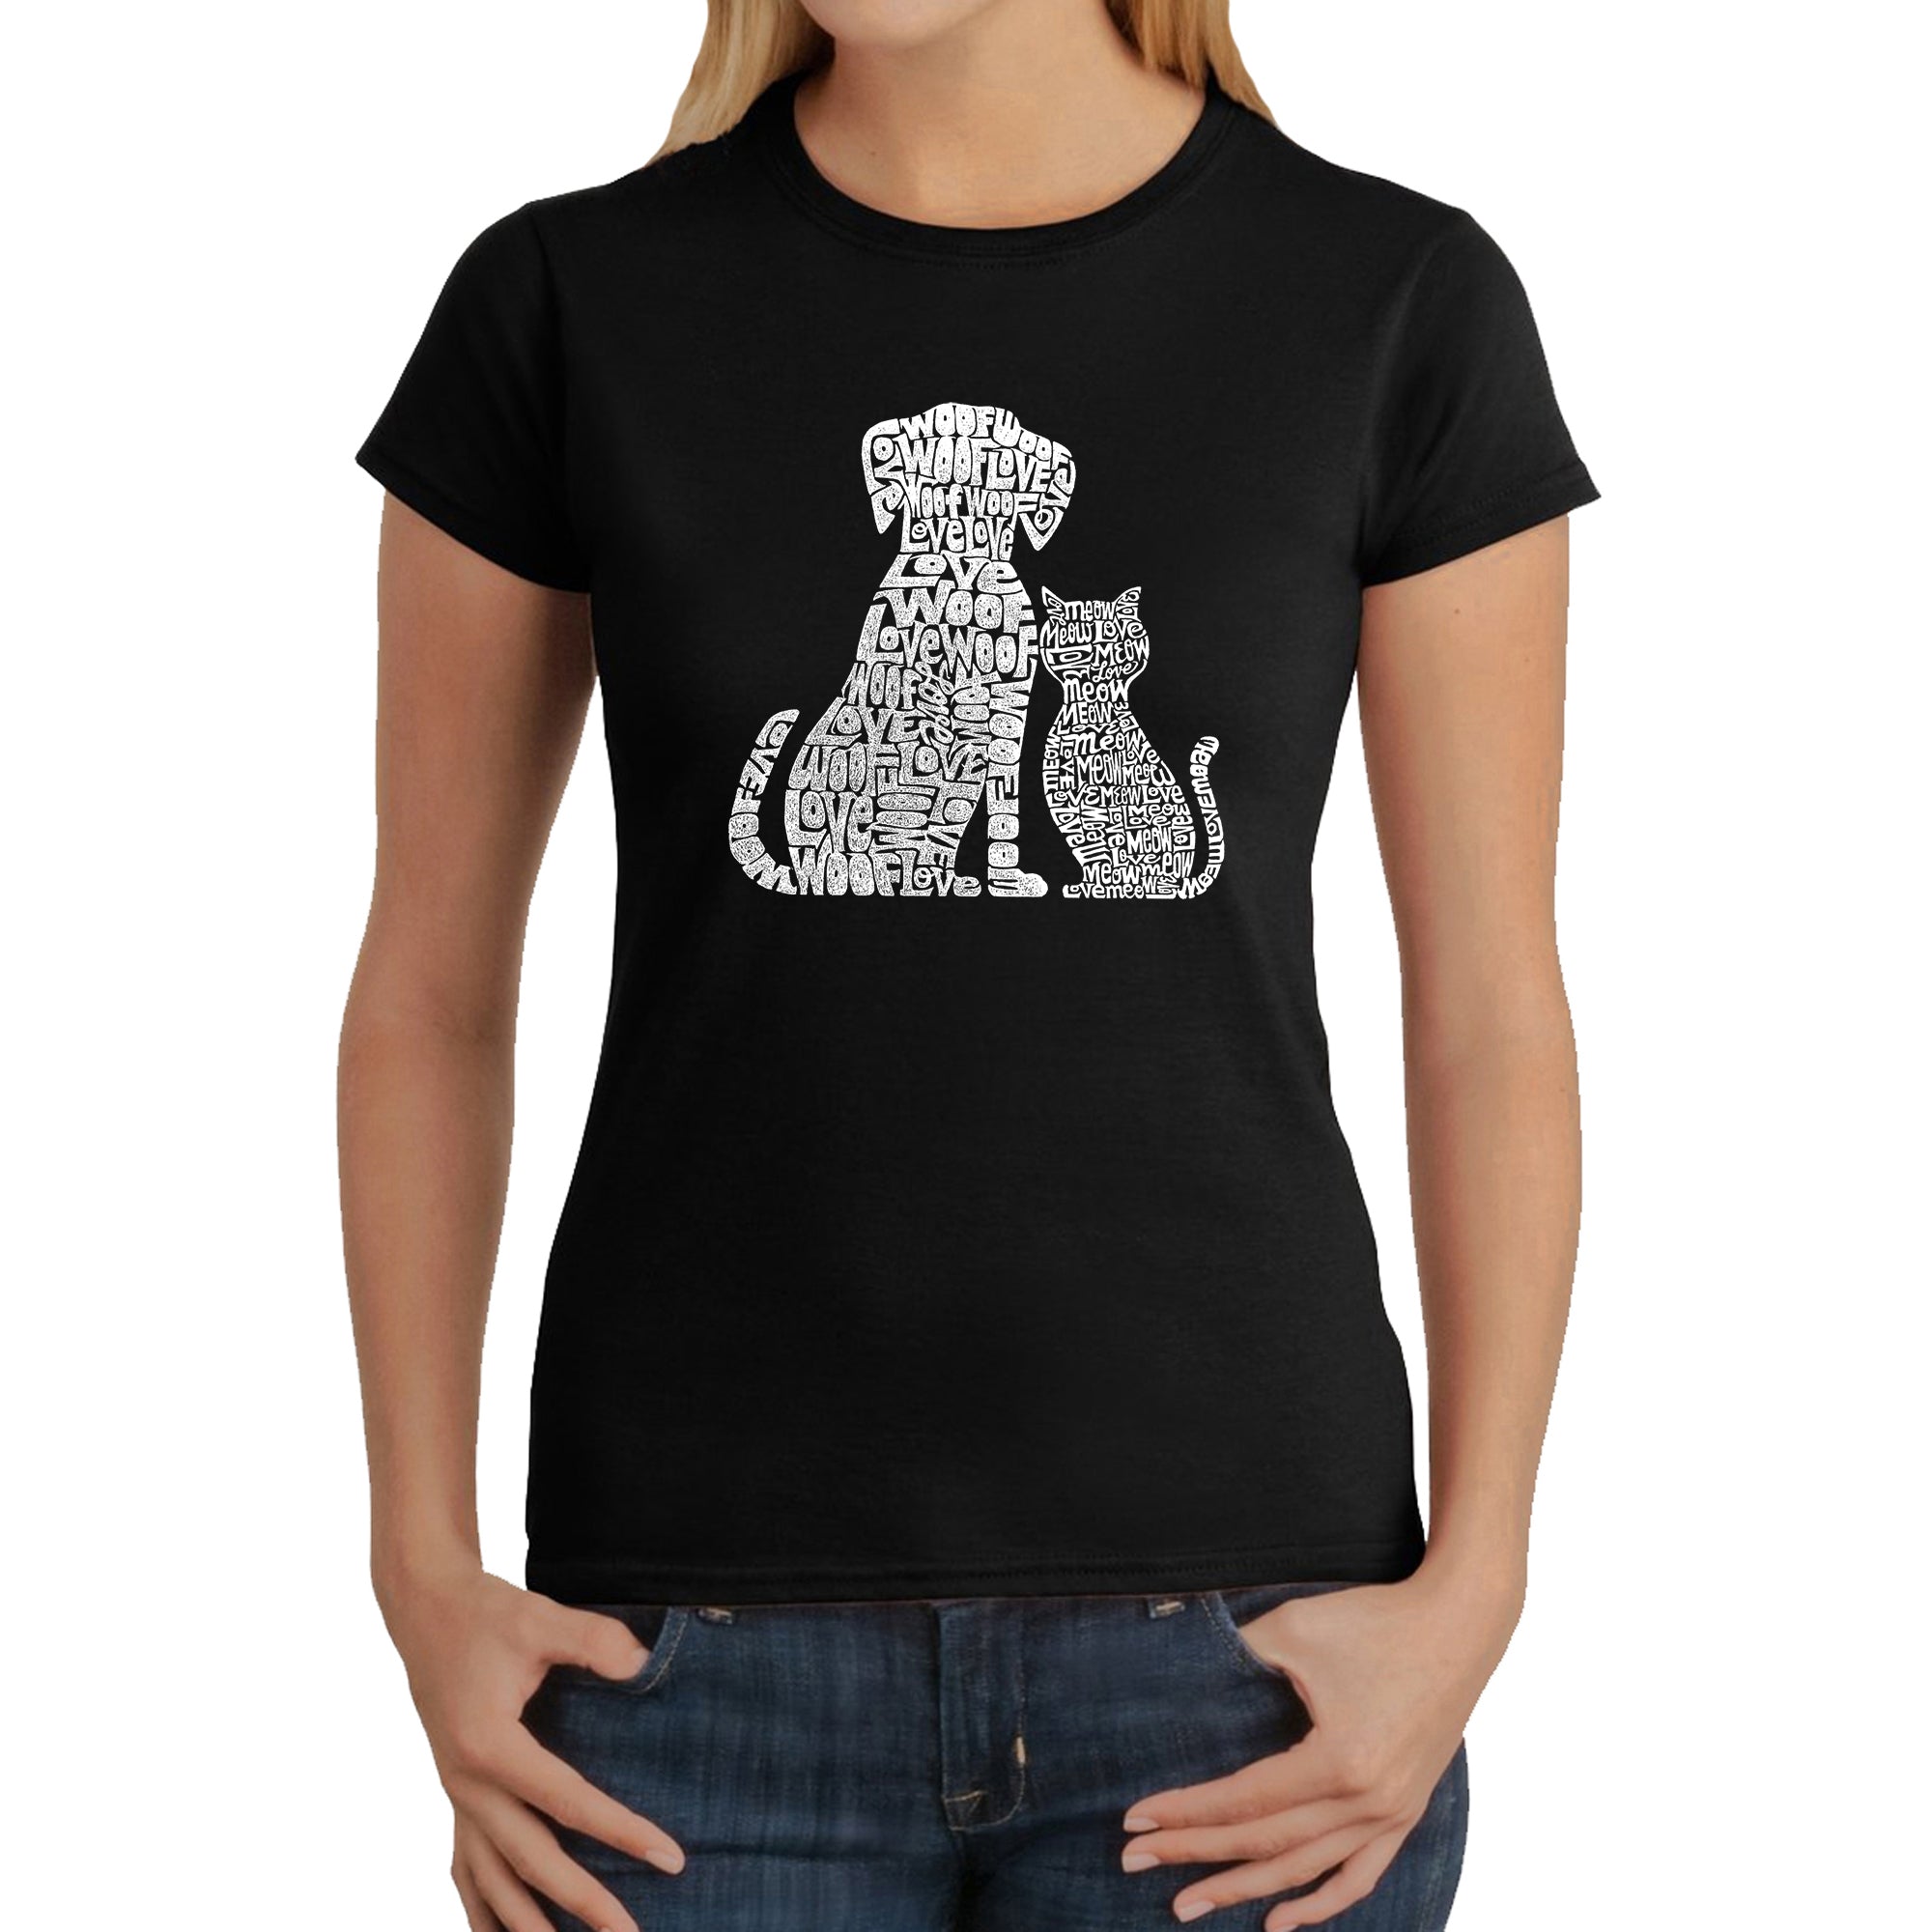 Dogs And Cats - Women's Word Art T-Shirt - Red - XS